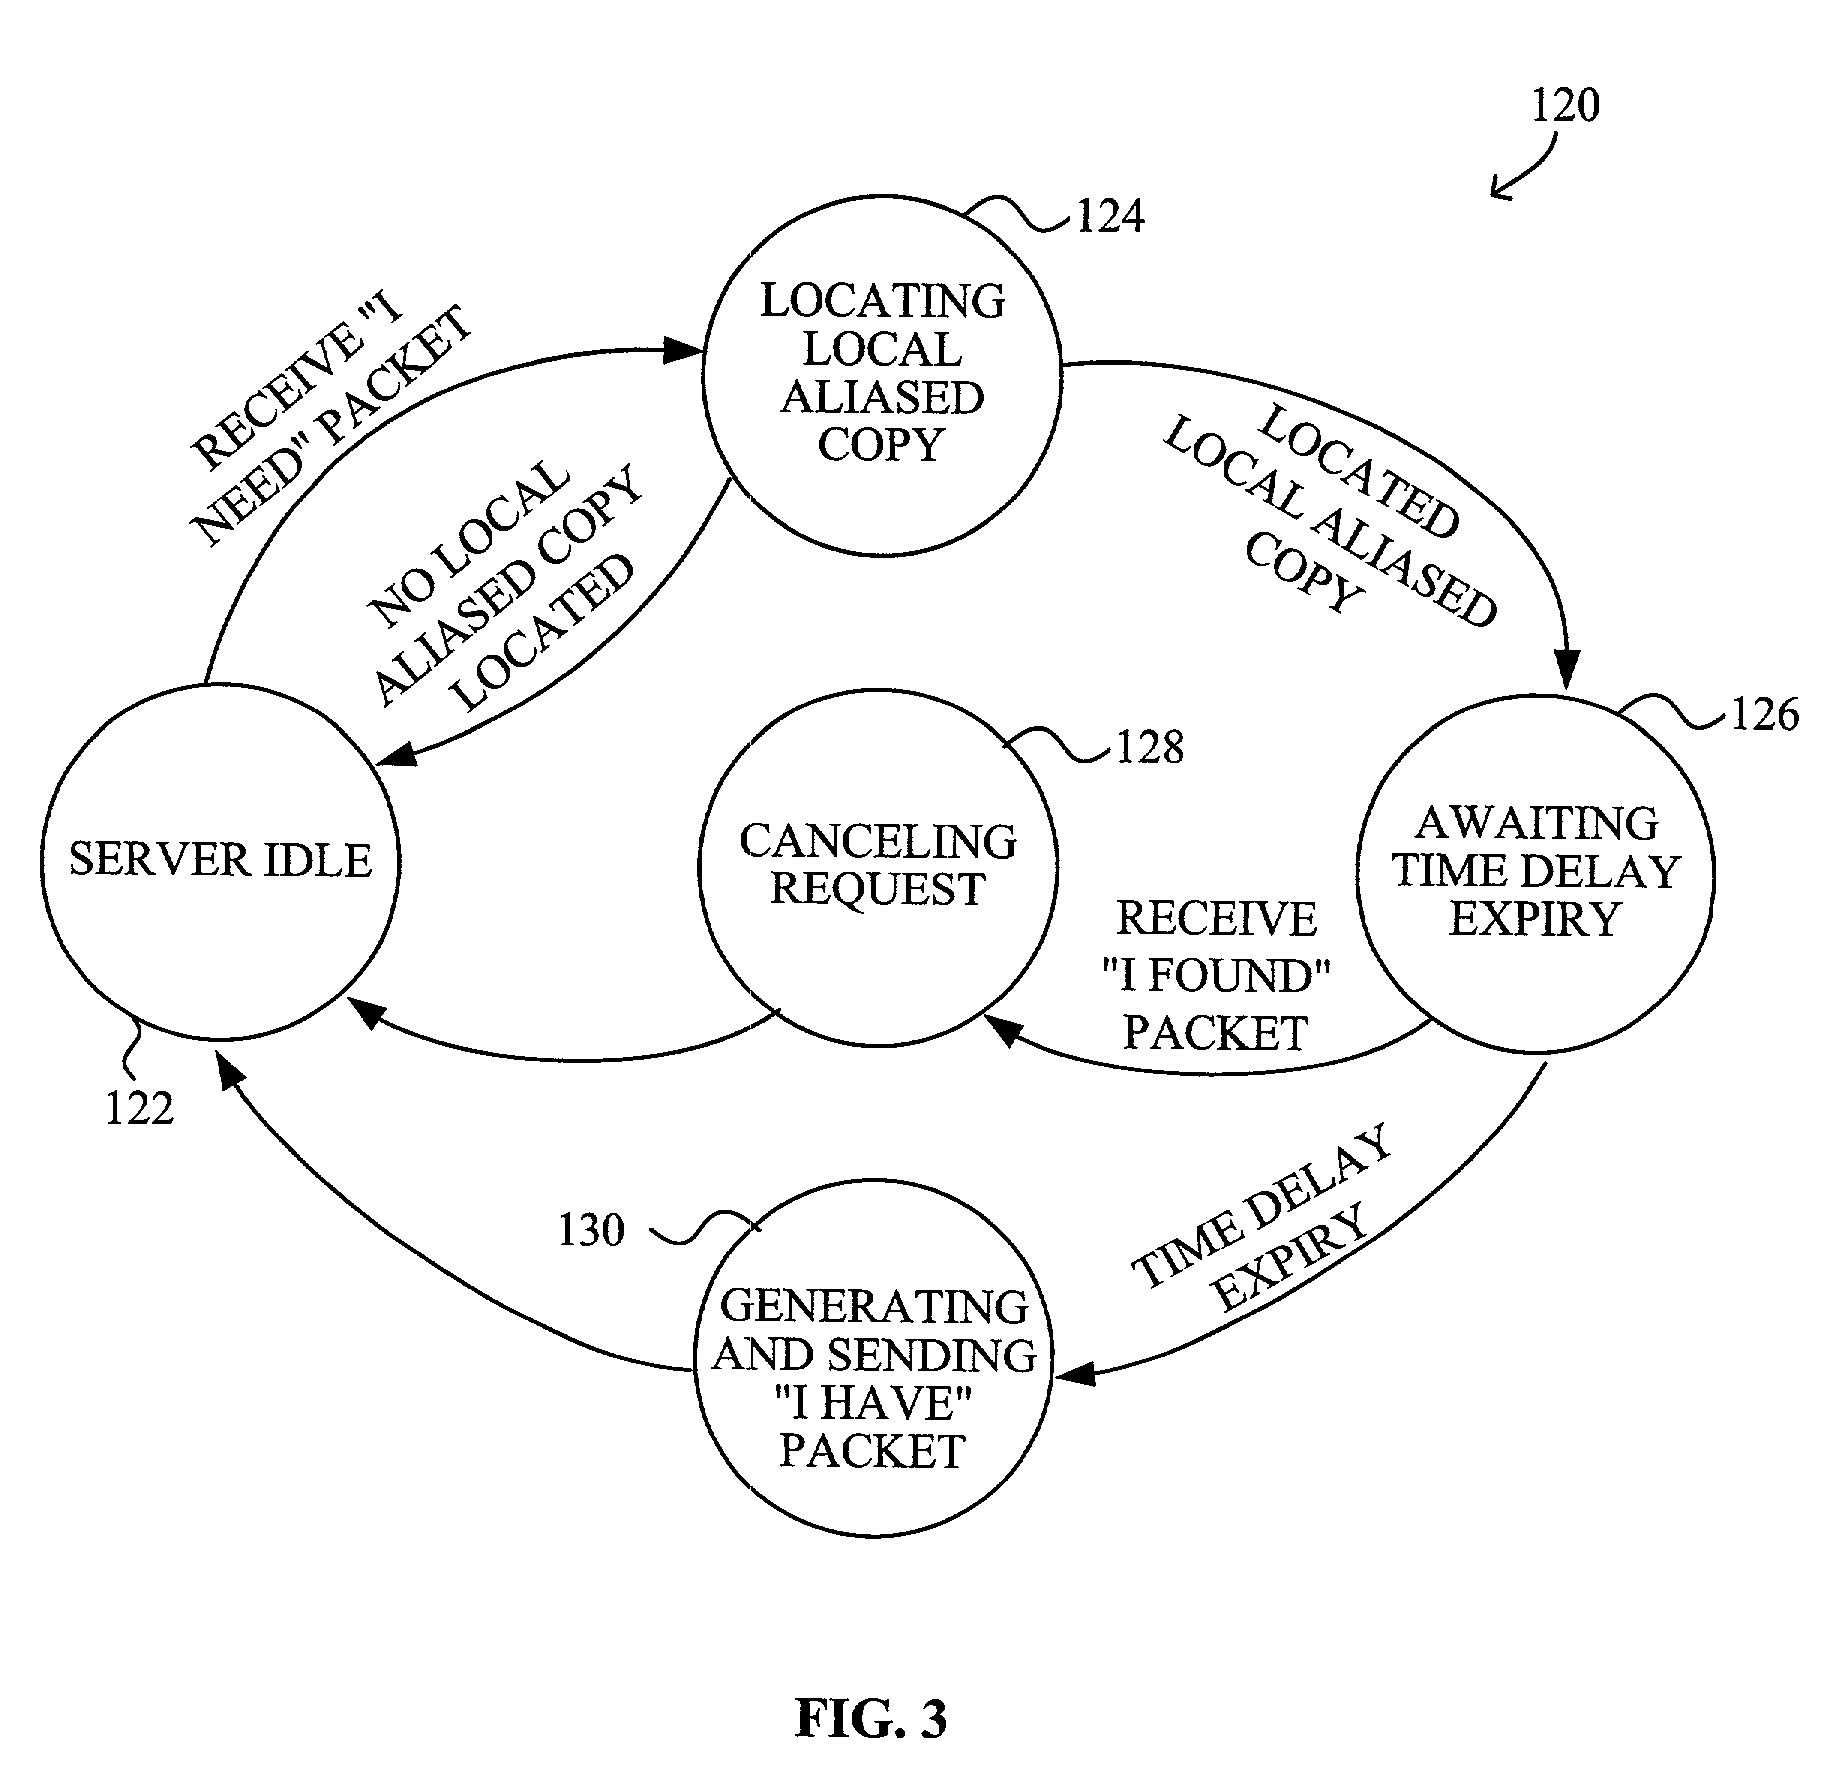 System and method to securely confirm performance of task by a peer in a peer-to-peer network environment